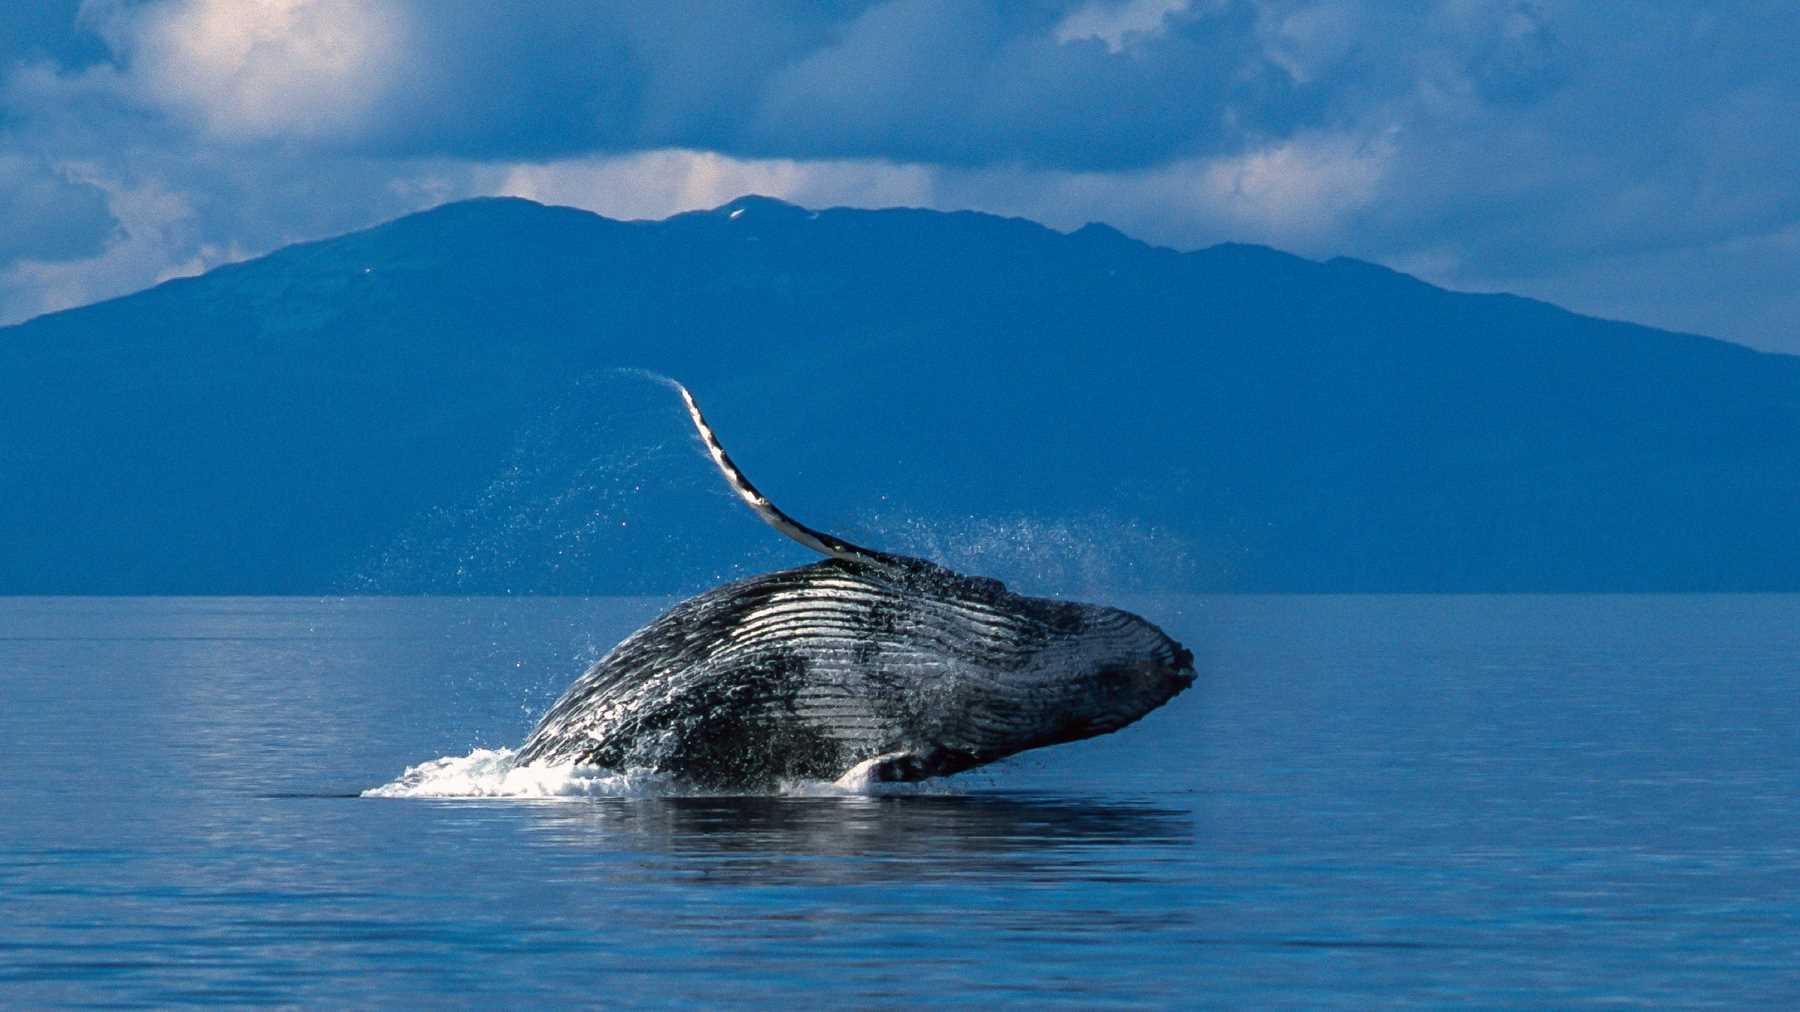 A whale bursting through the surface of the ocean